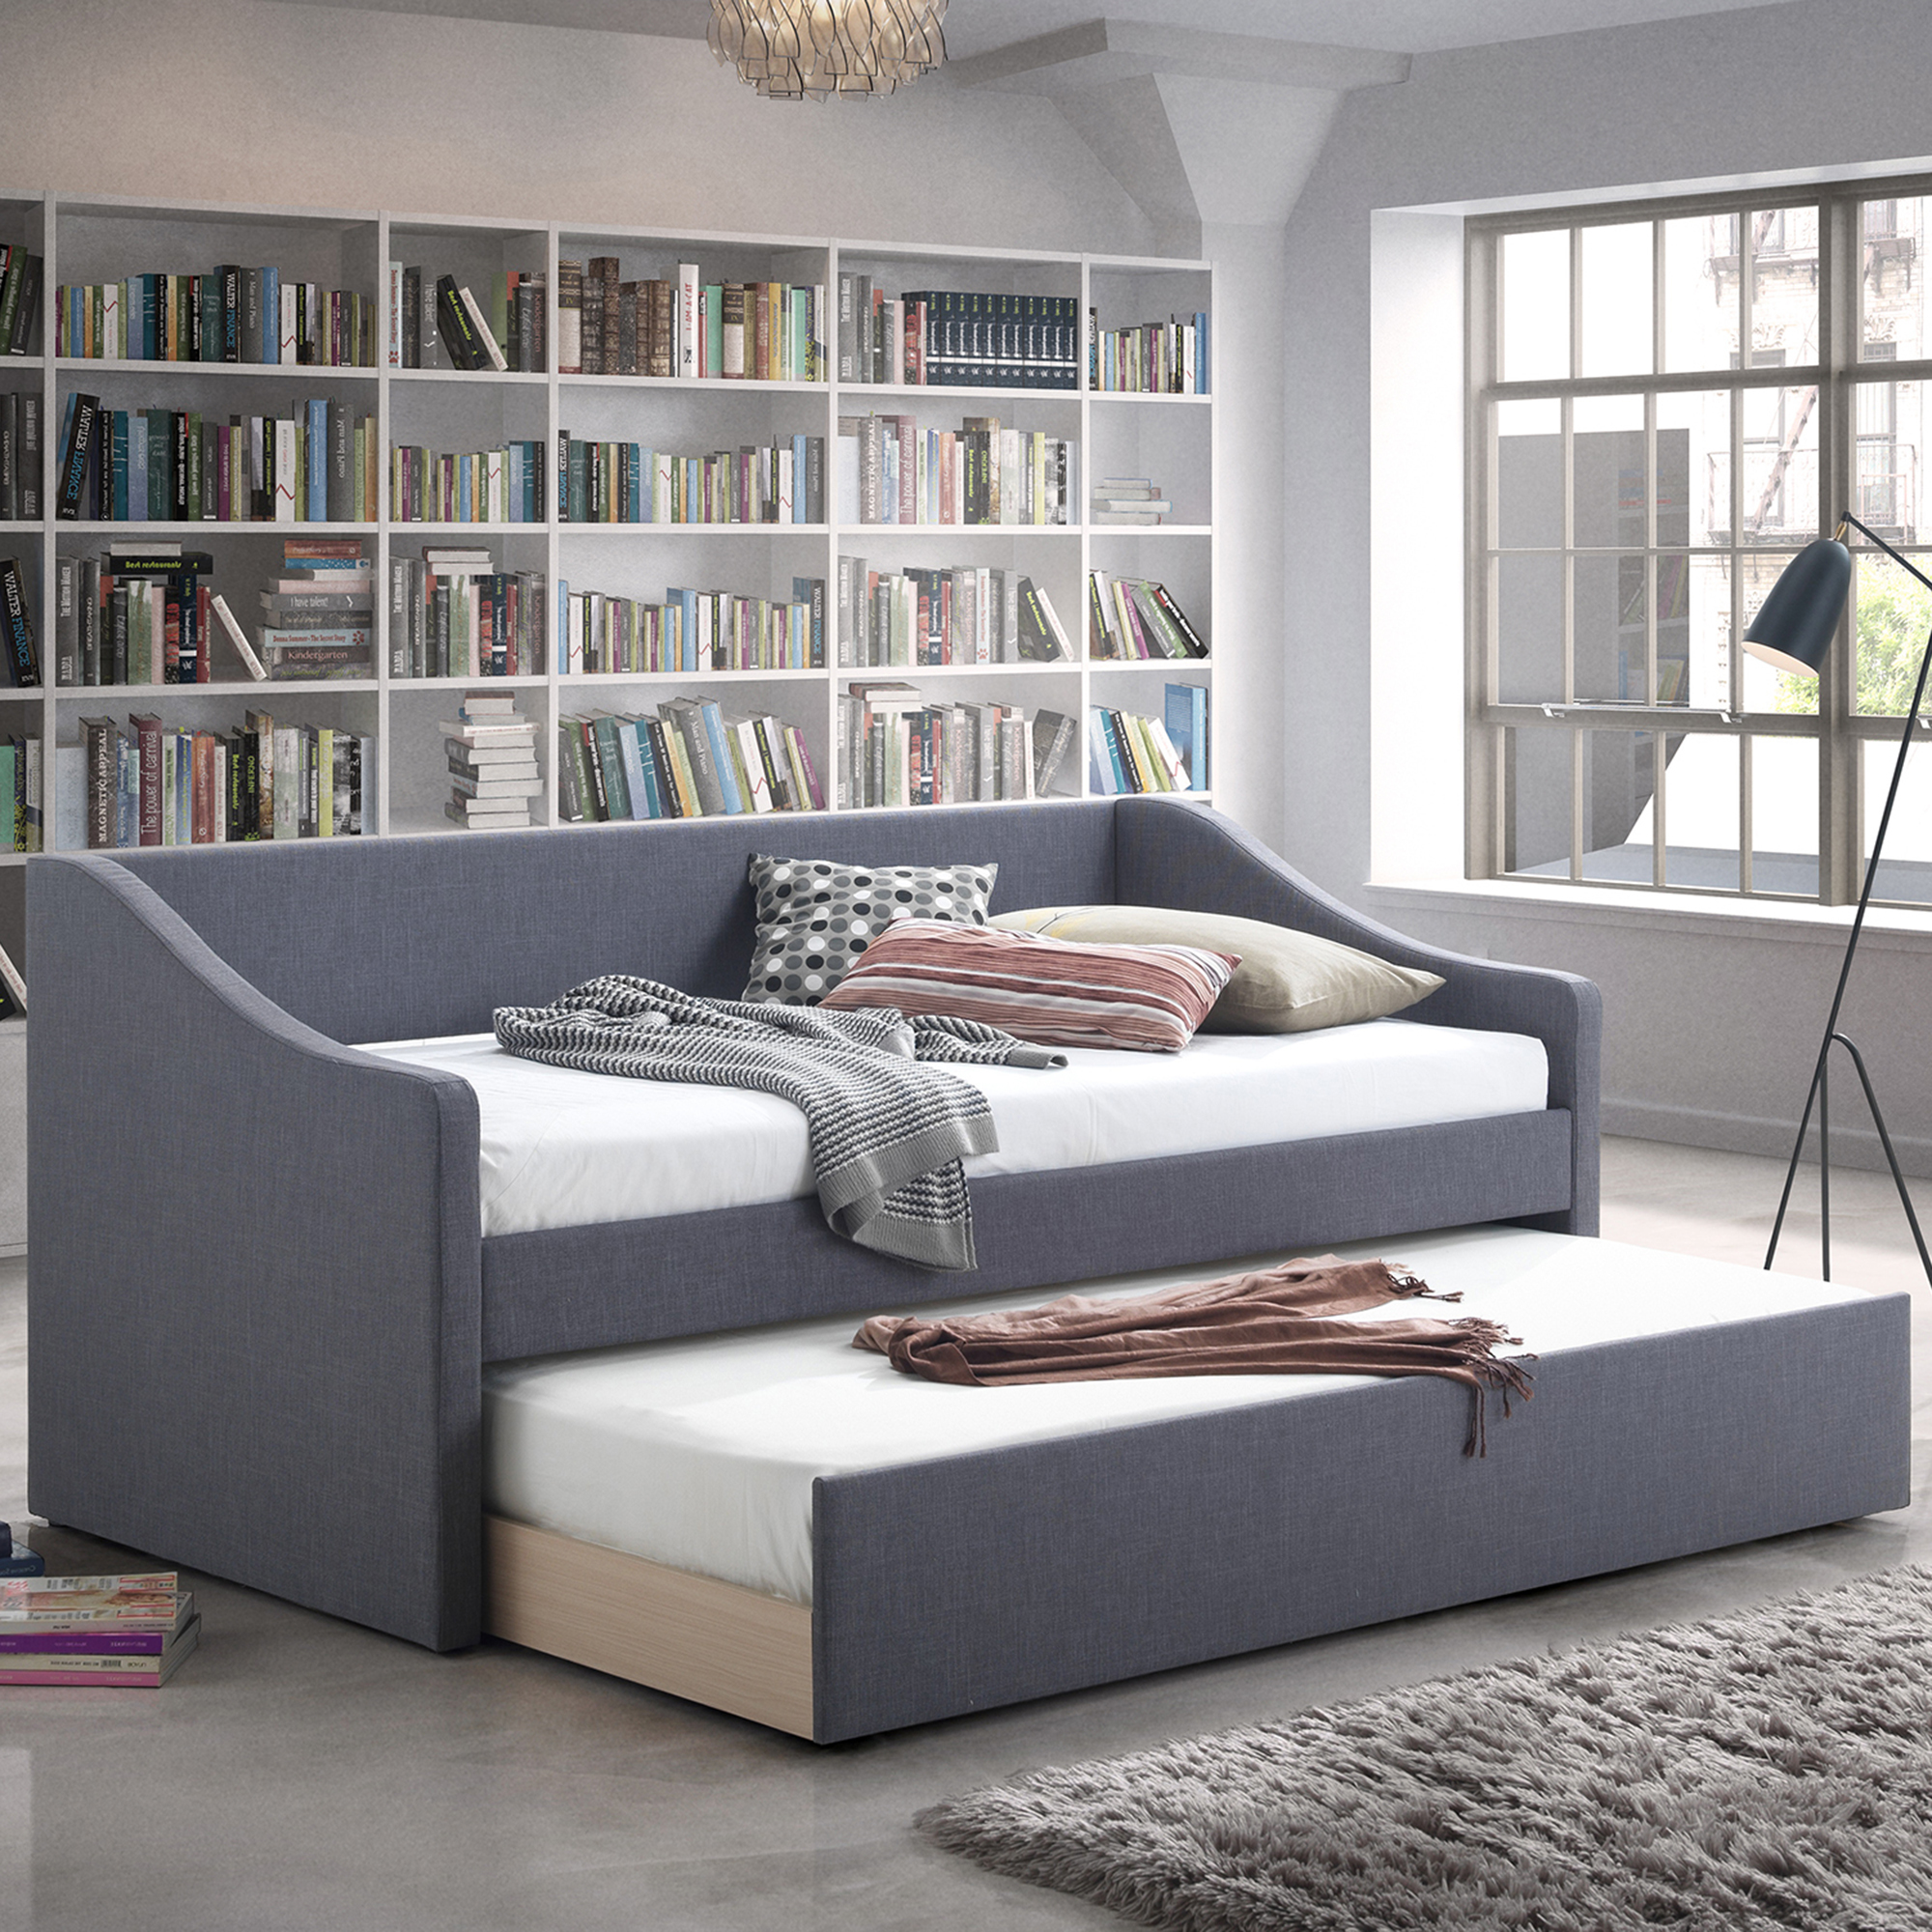 Webster Armidale Single Sofa Daybed, Sofa With Trundle And Storage